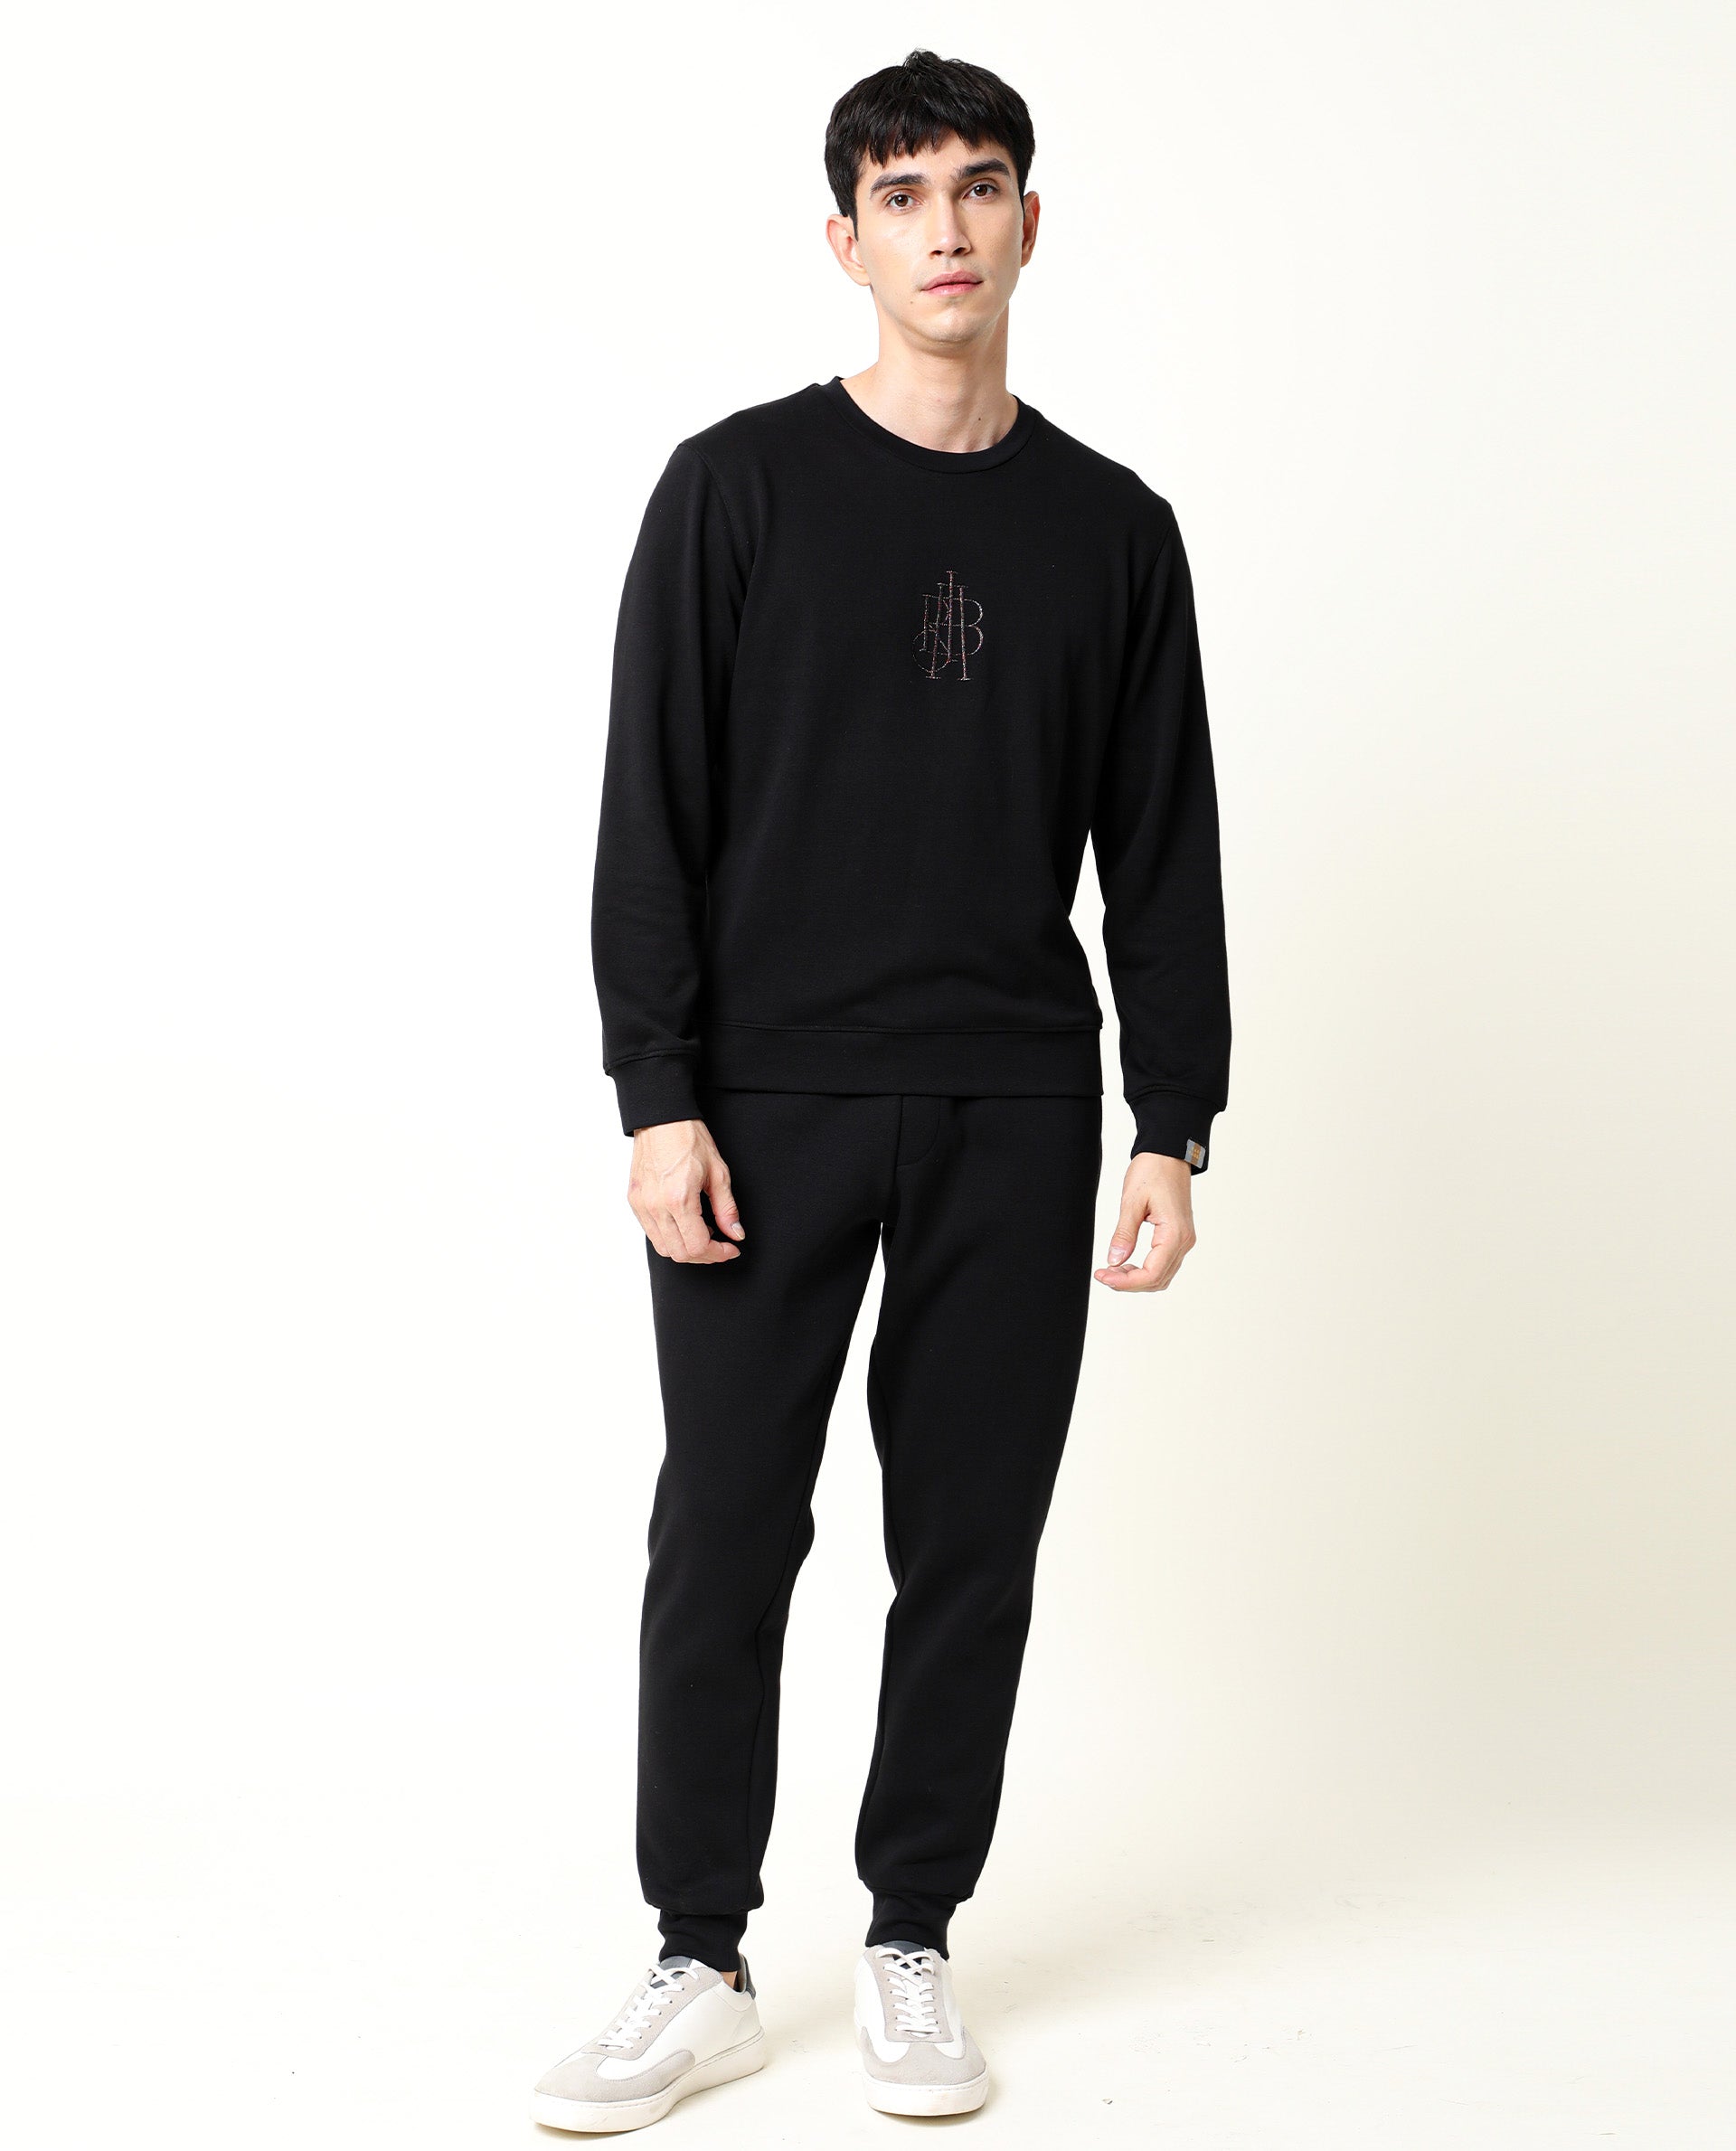 Mens TShirt and Track Pants Combo Under 1500  Lussta